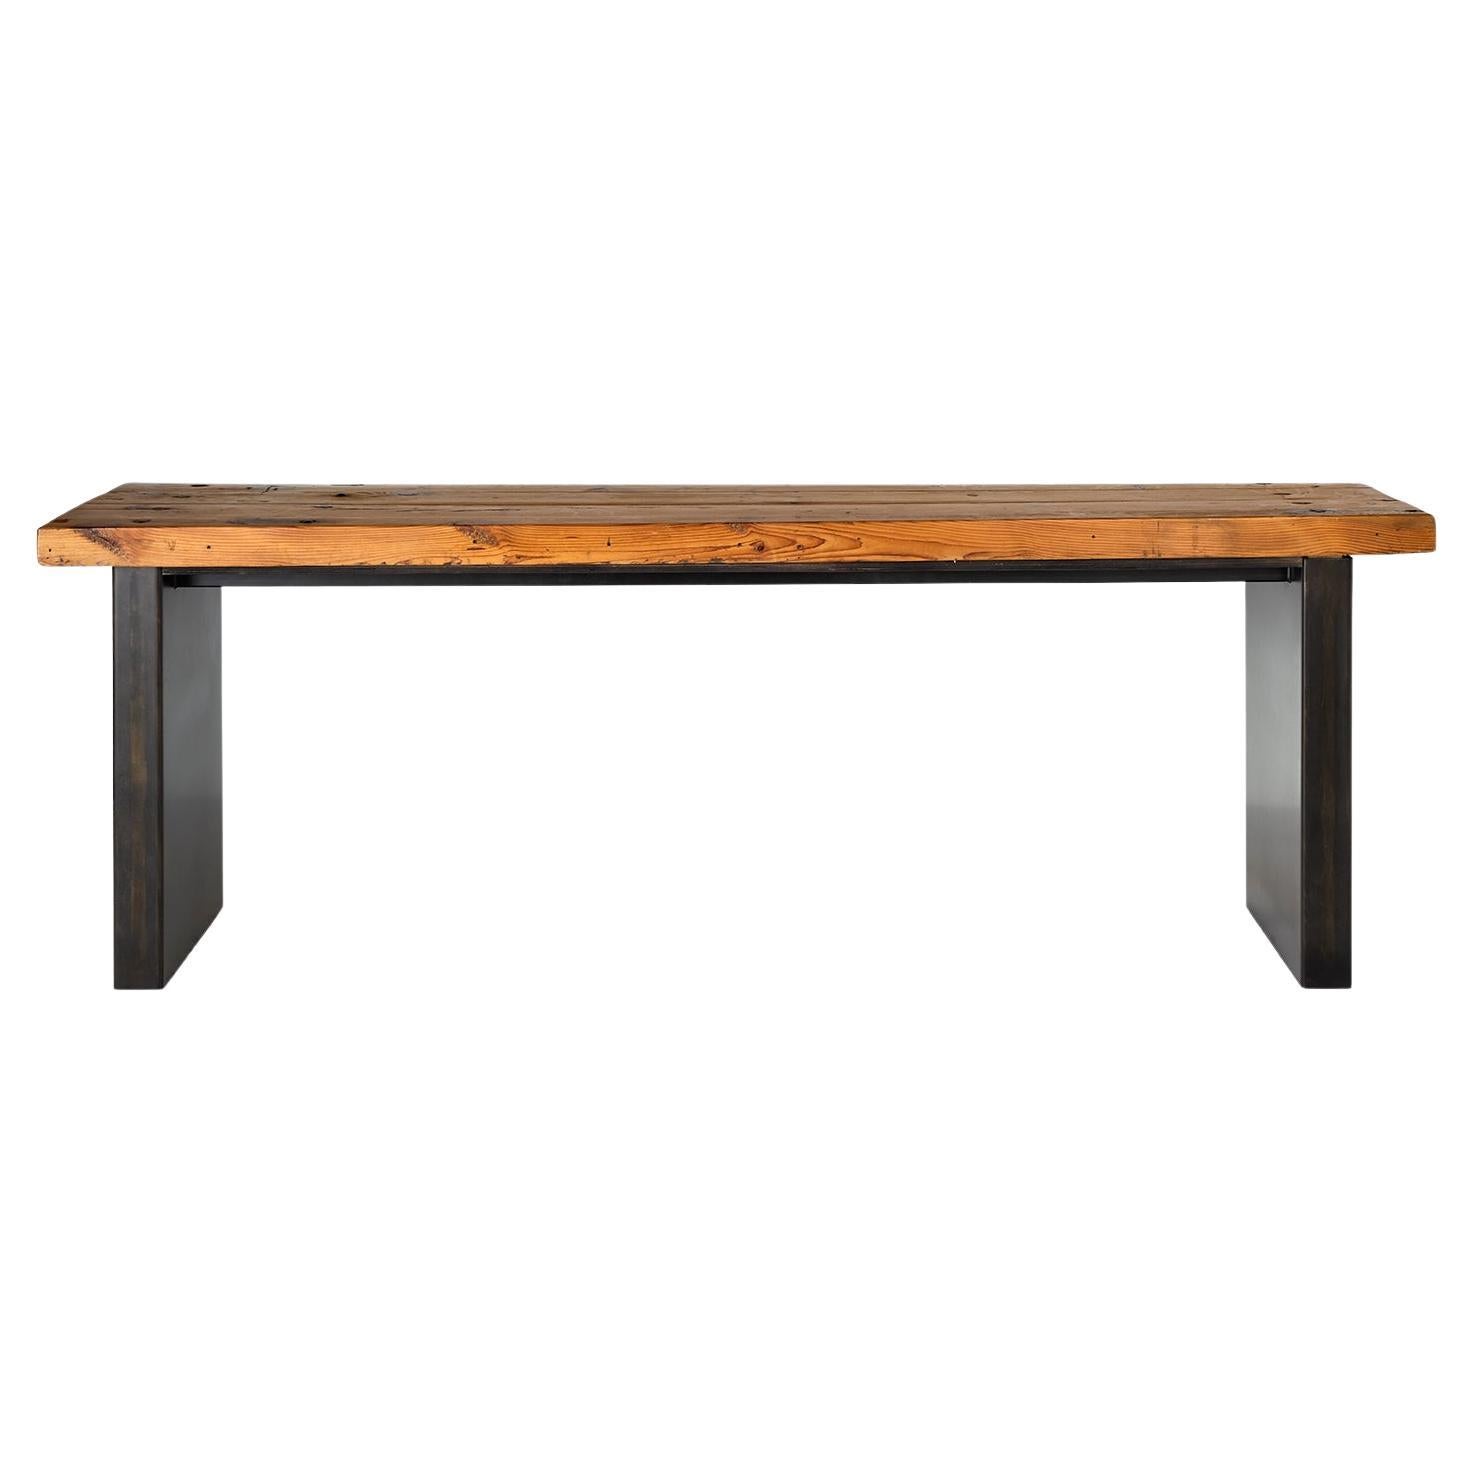 Wood Plank Top on Patinaed Steel Base Console